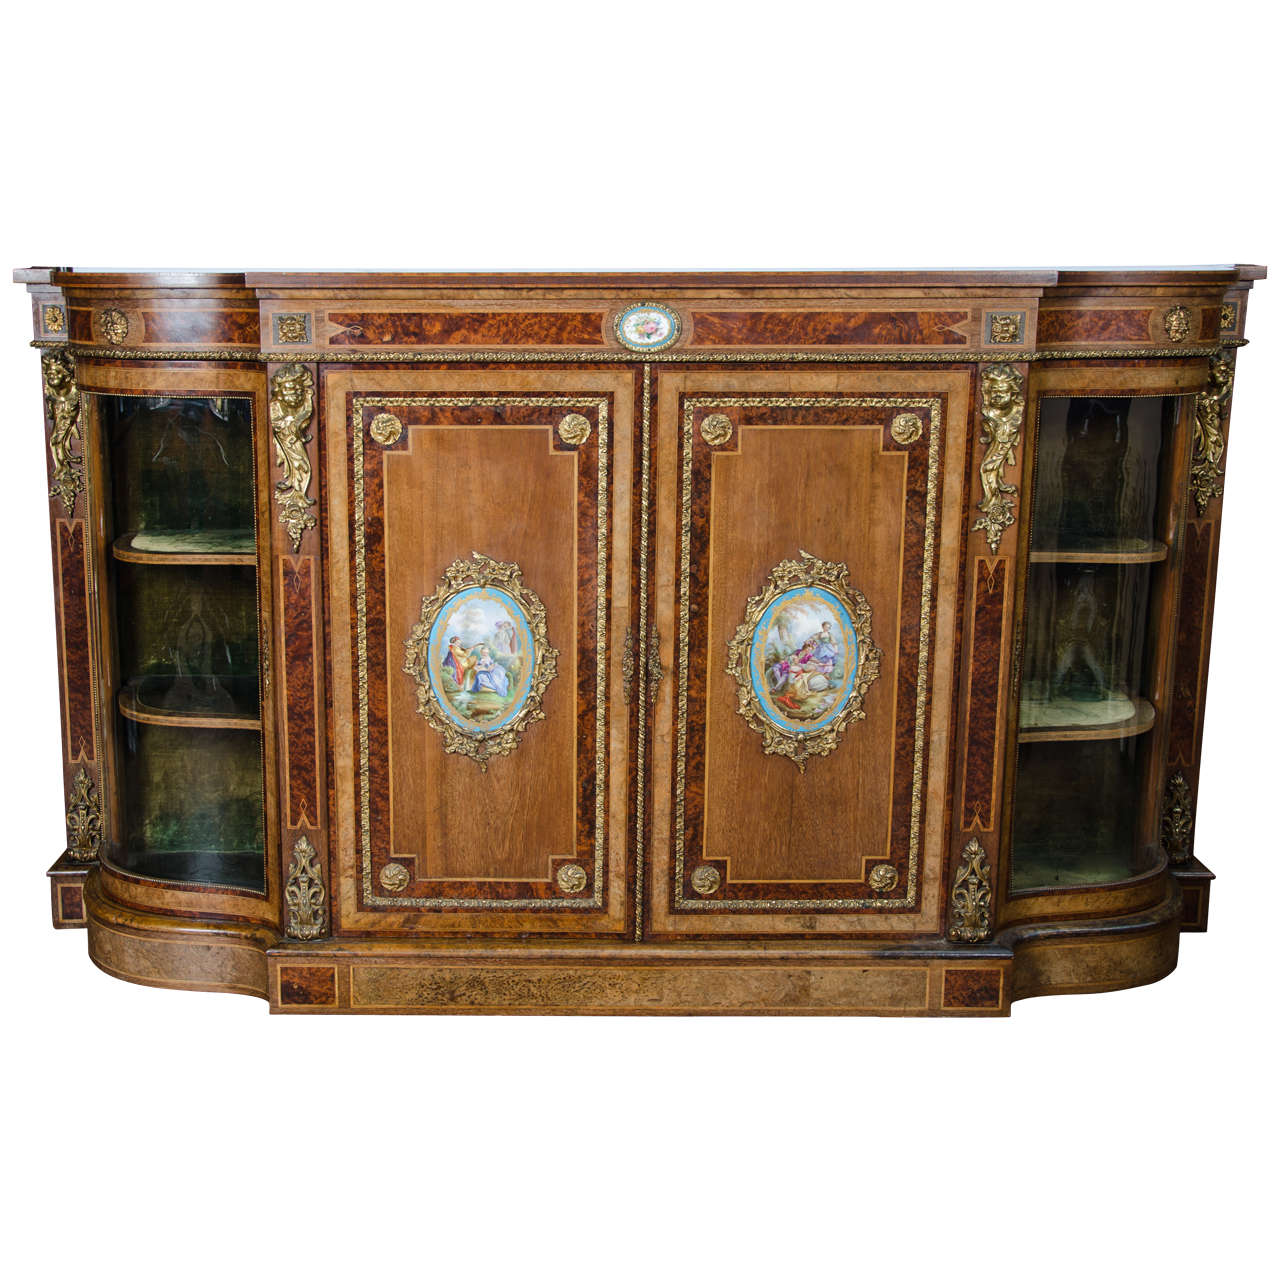 19th Century bow fronted side cabinet with porcelain plaques. 77" wide (196cm) For Sale